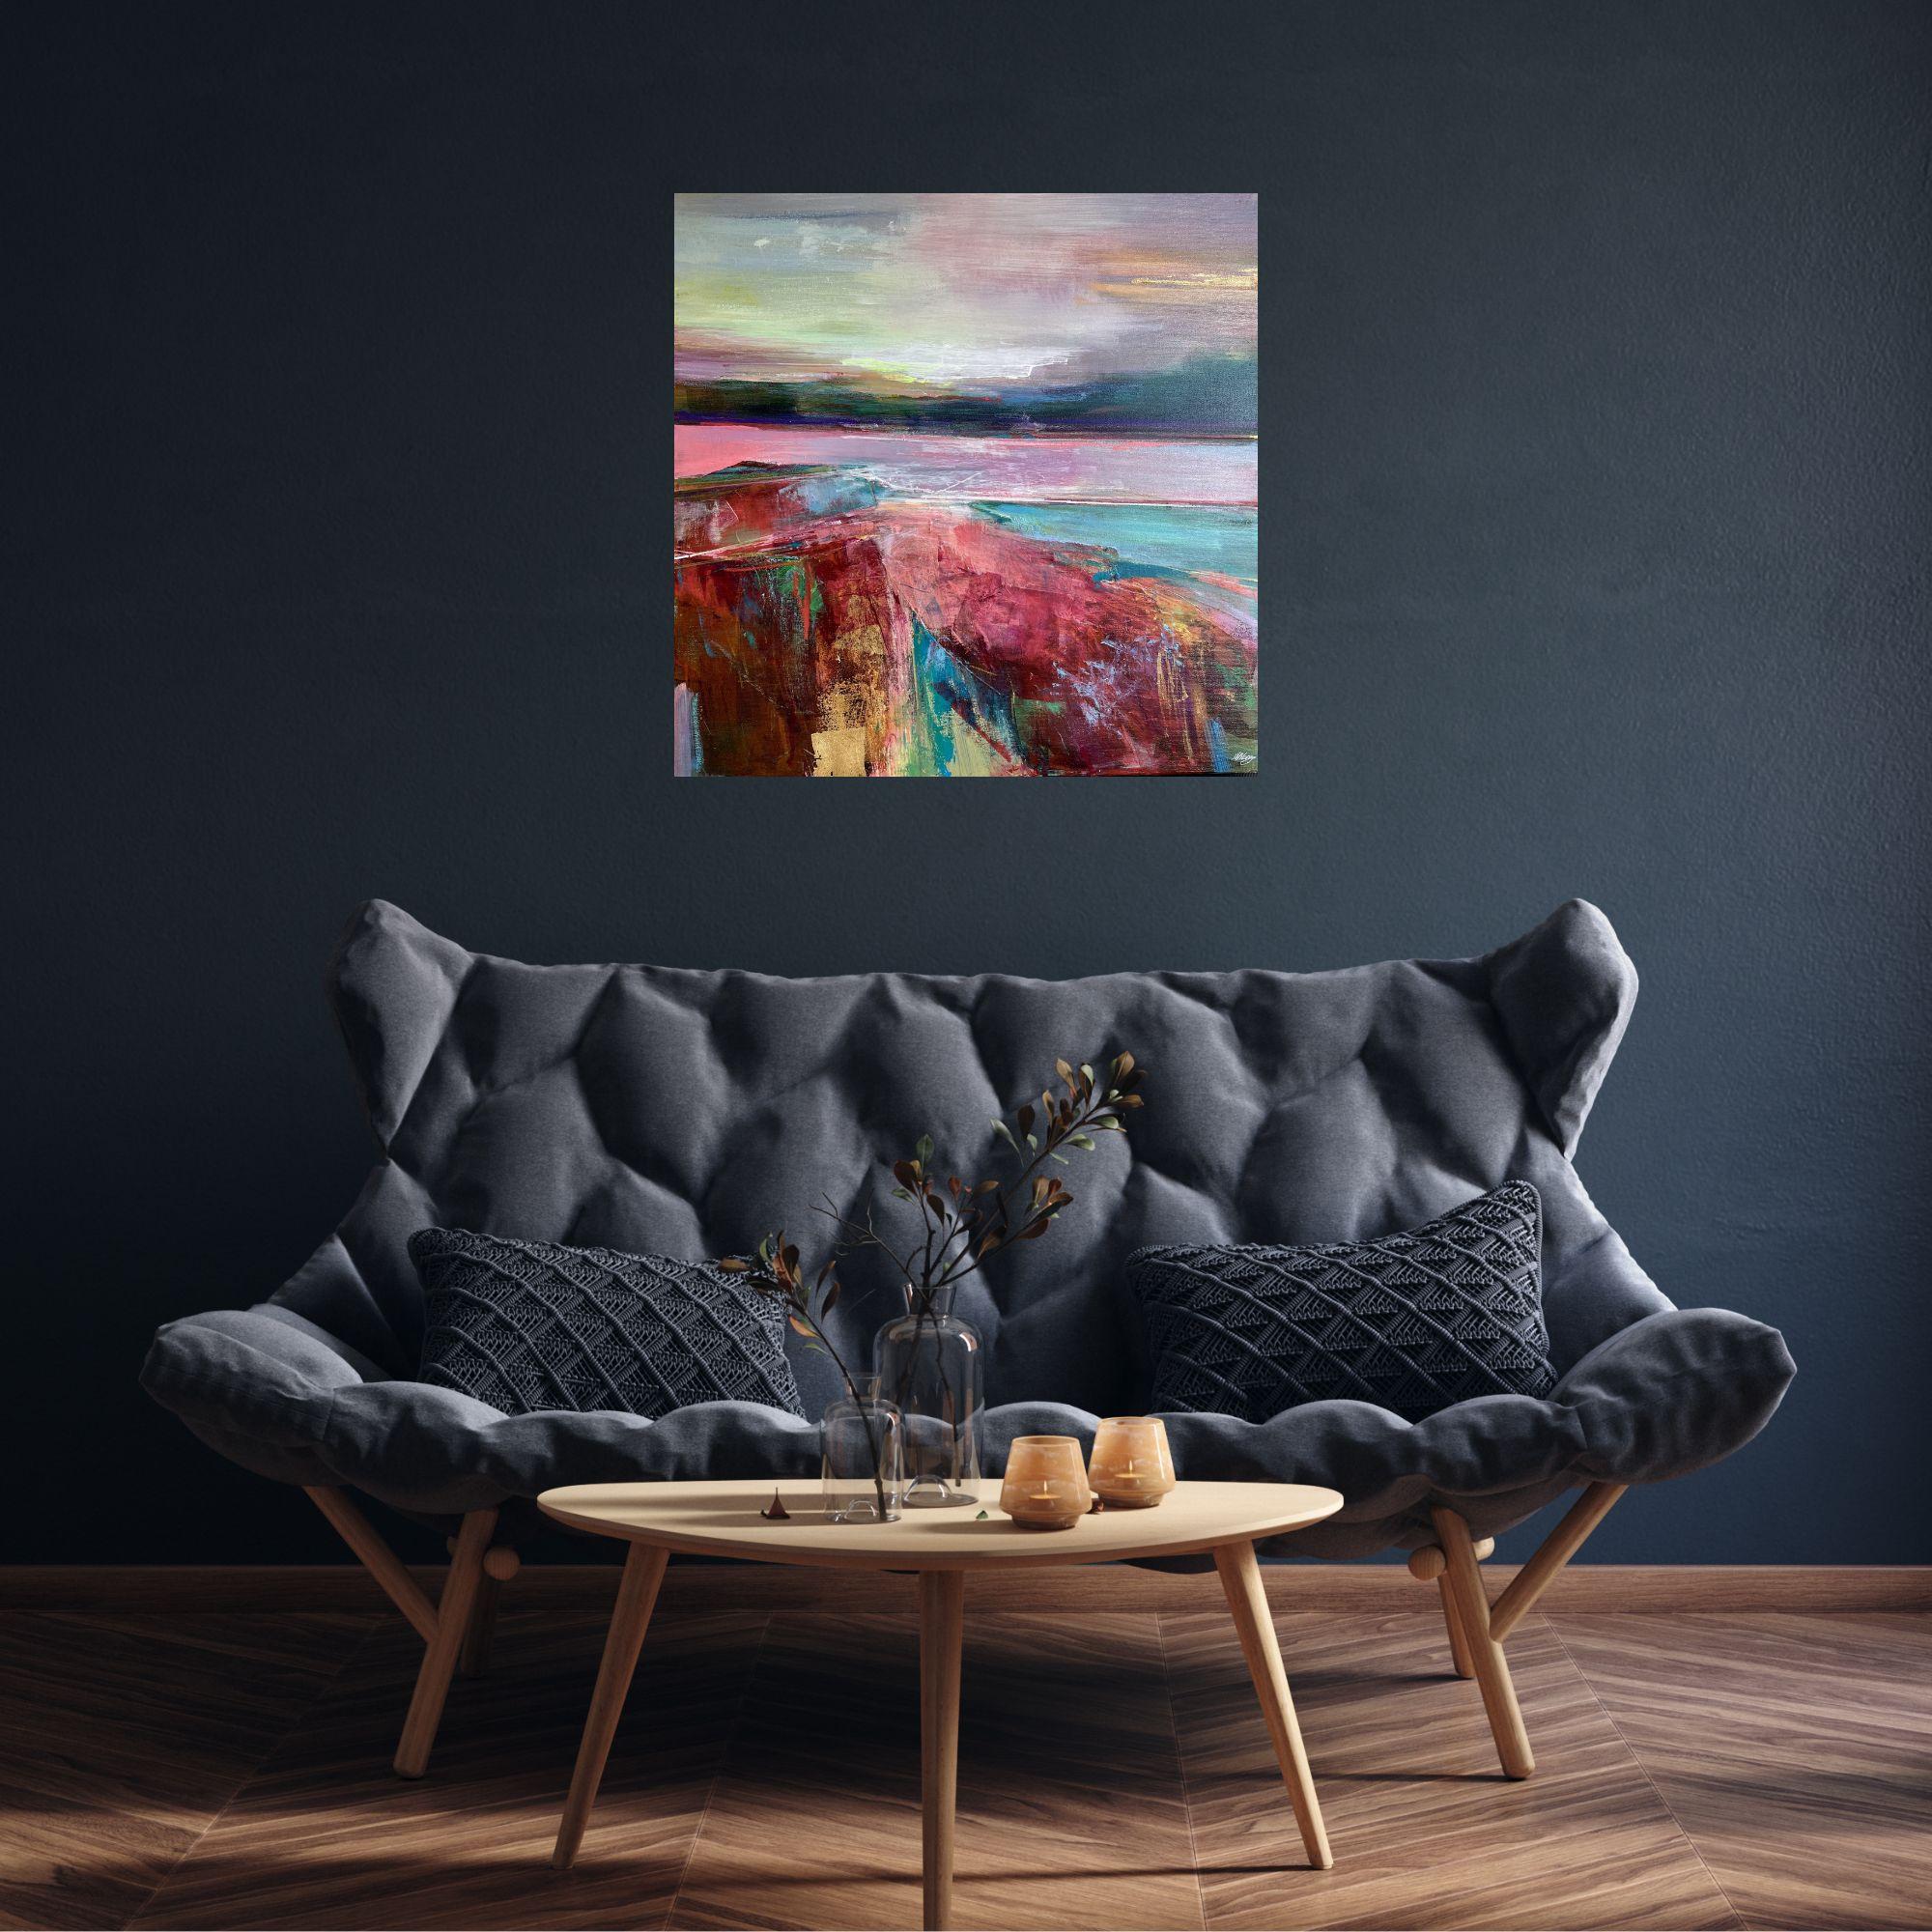 Towards the evening 4-original abstract seascape landscape painting- modern art - Painting by Magdalena Morey